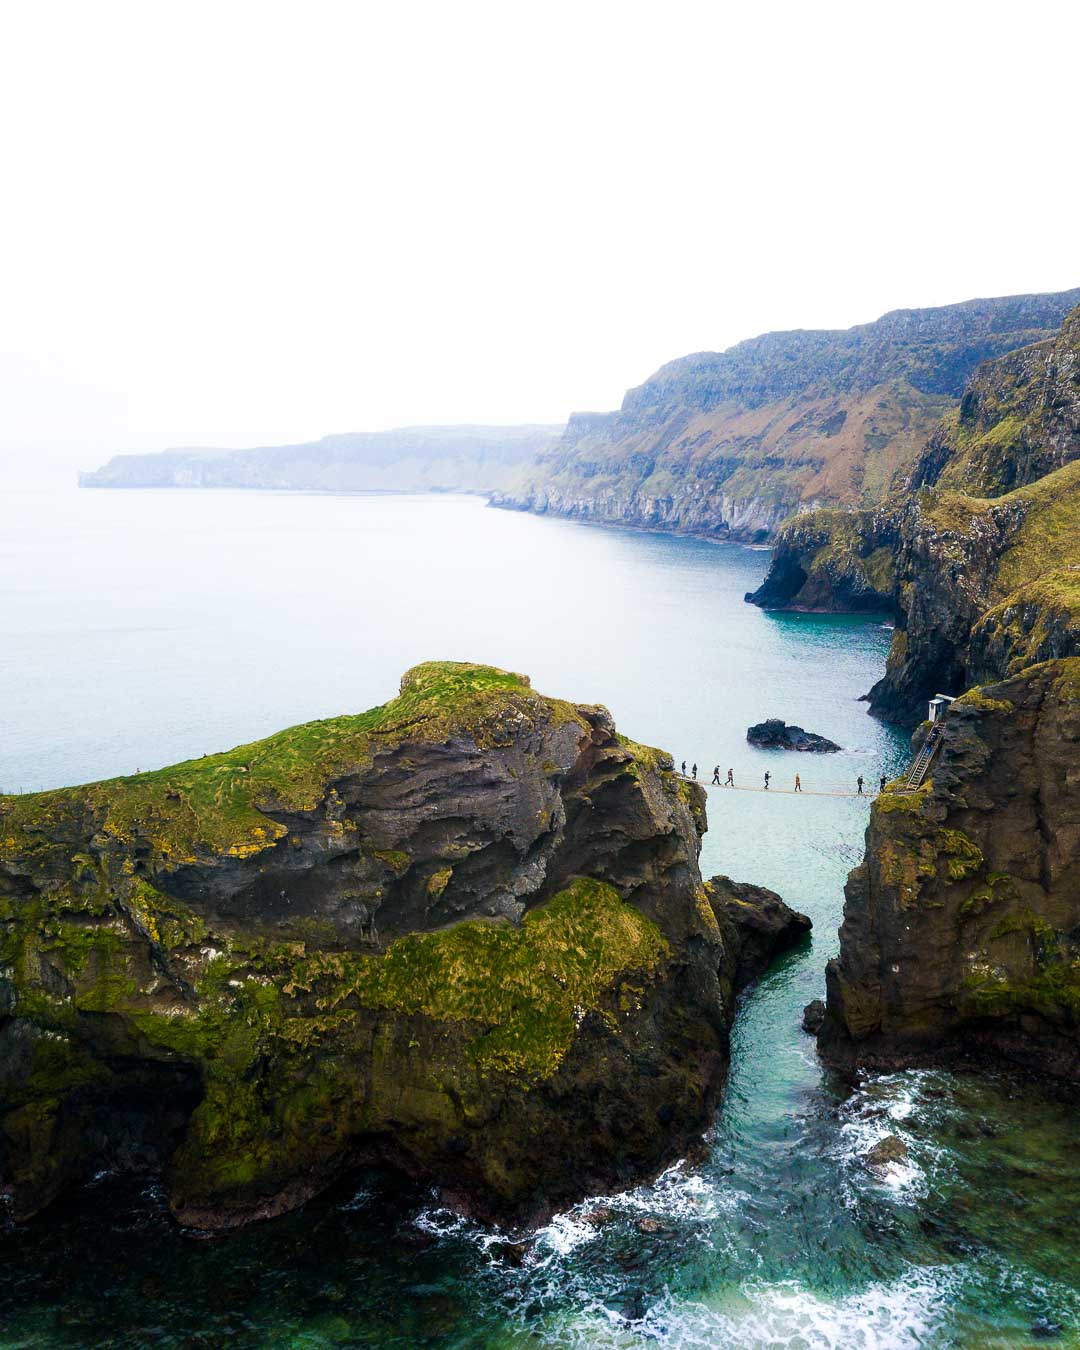 would you dare cross carrick a rede rope bridge?